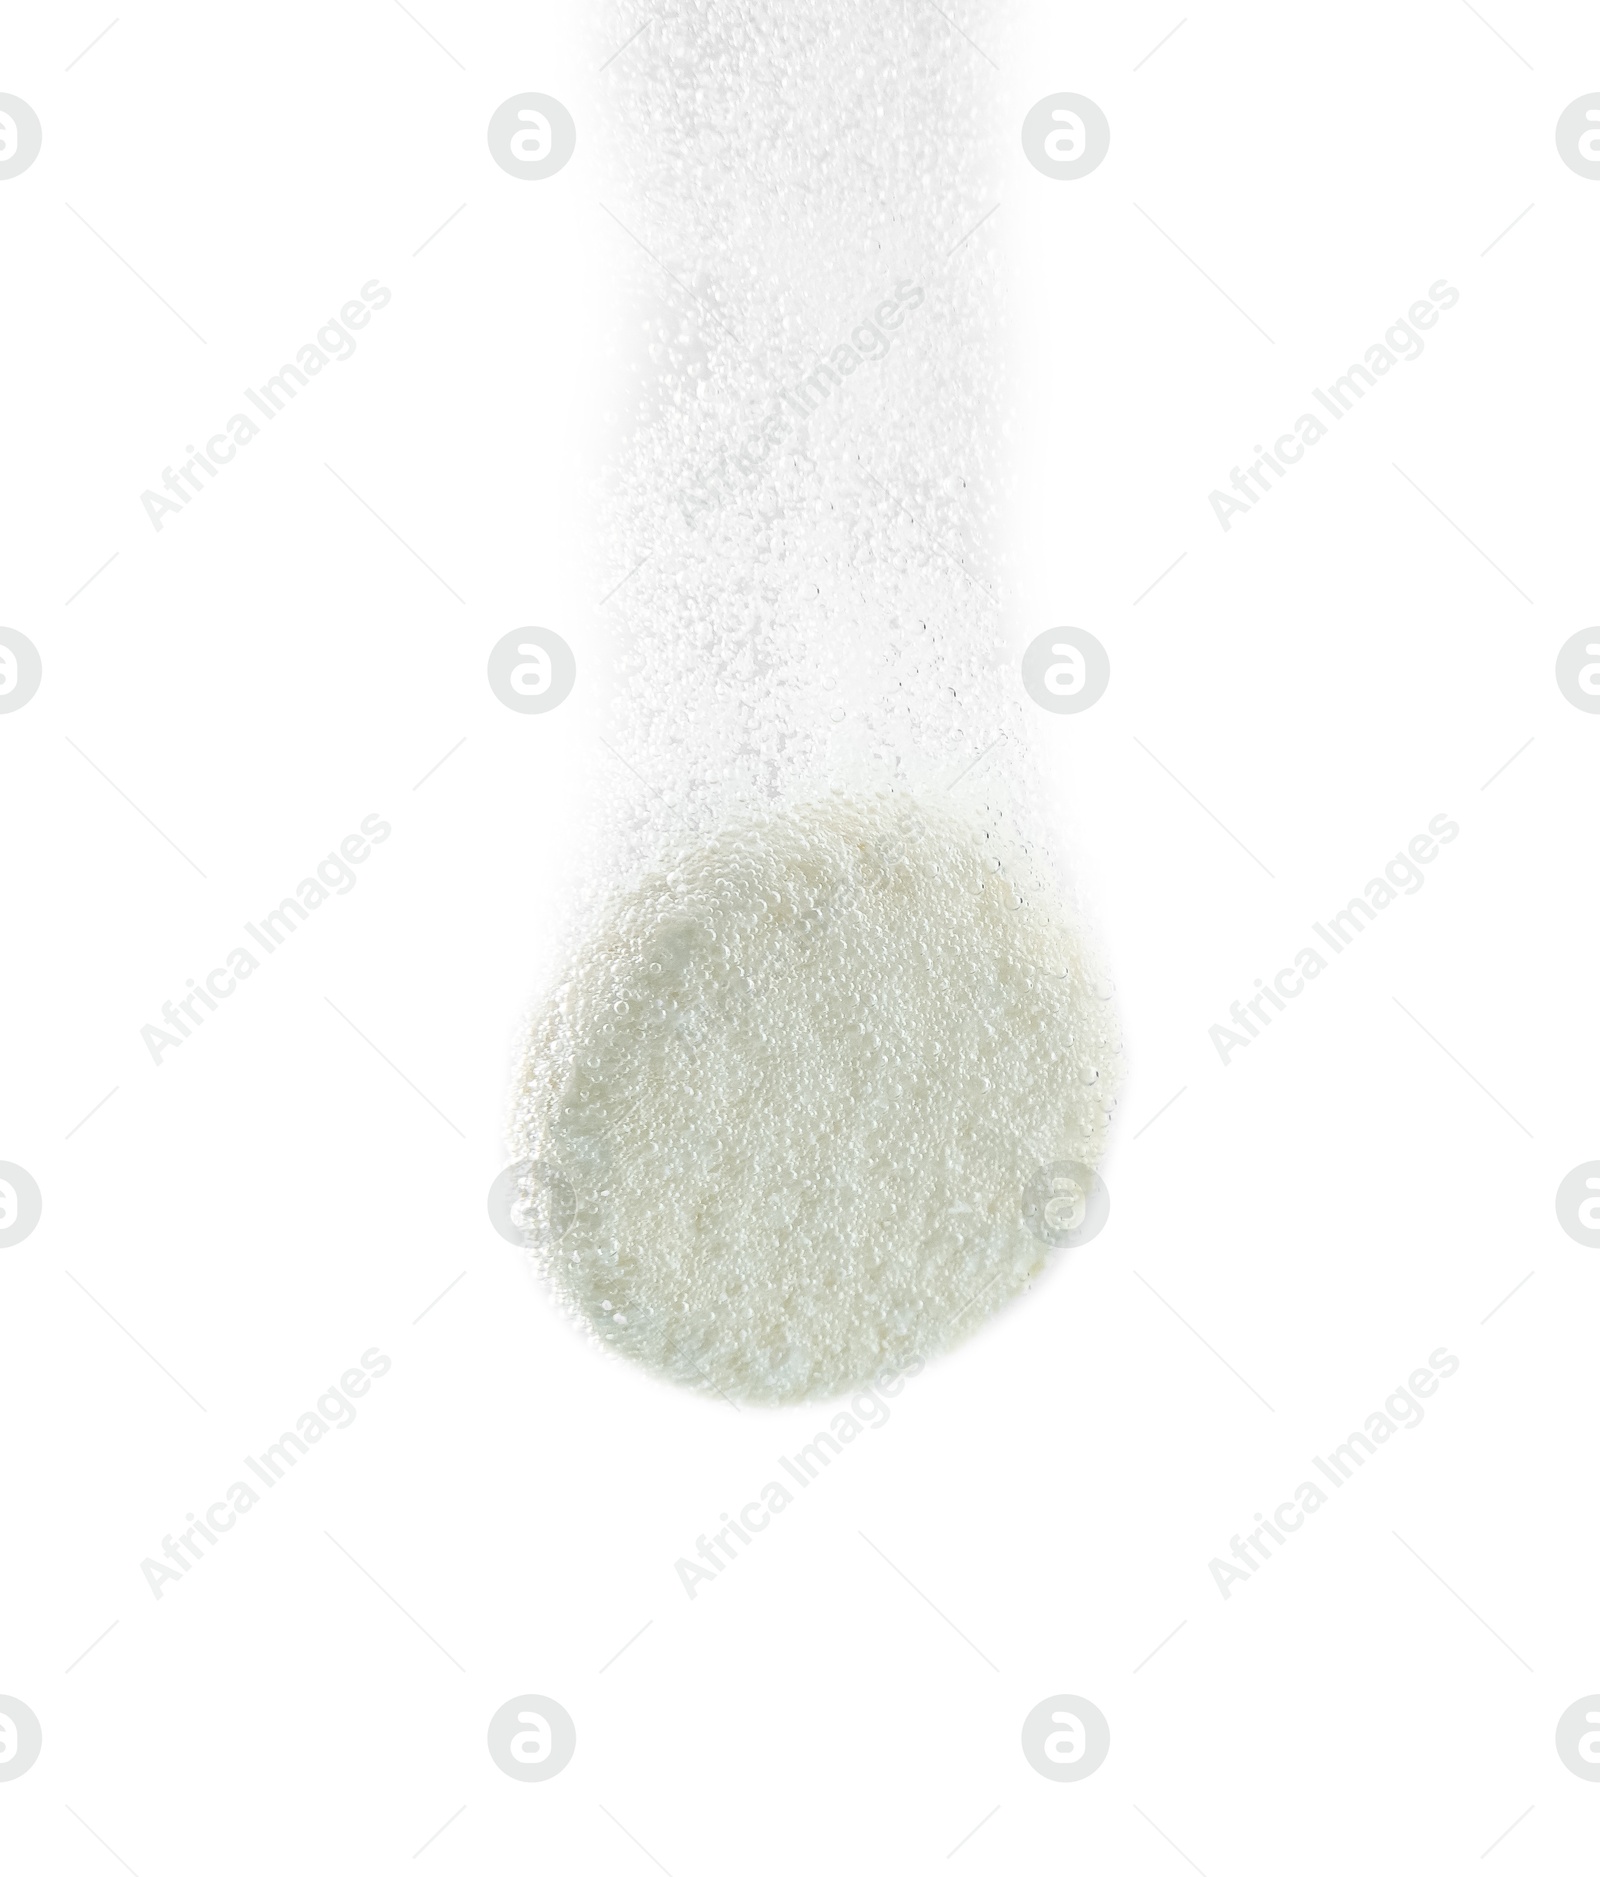 Photo of Effervescent pill dissolving in water on light background, closeup